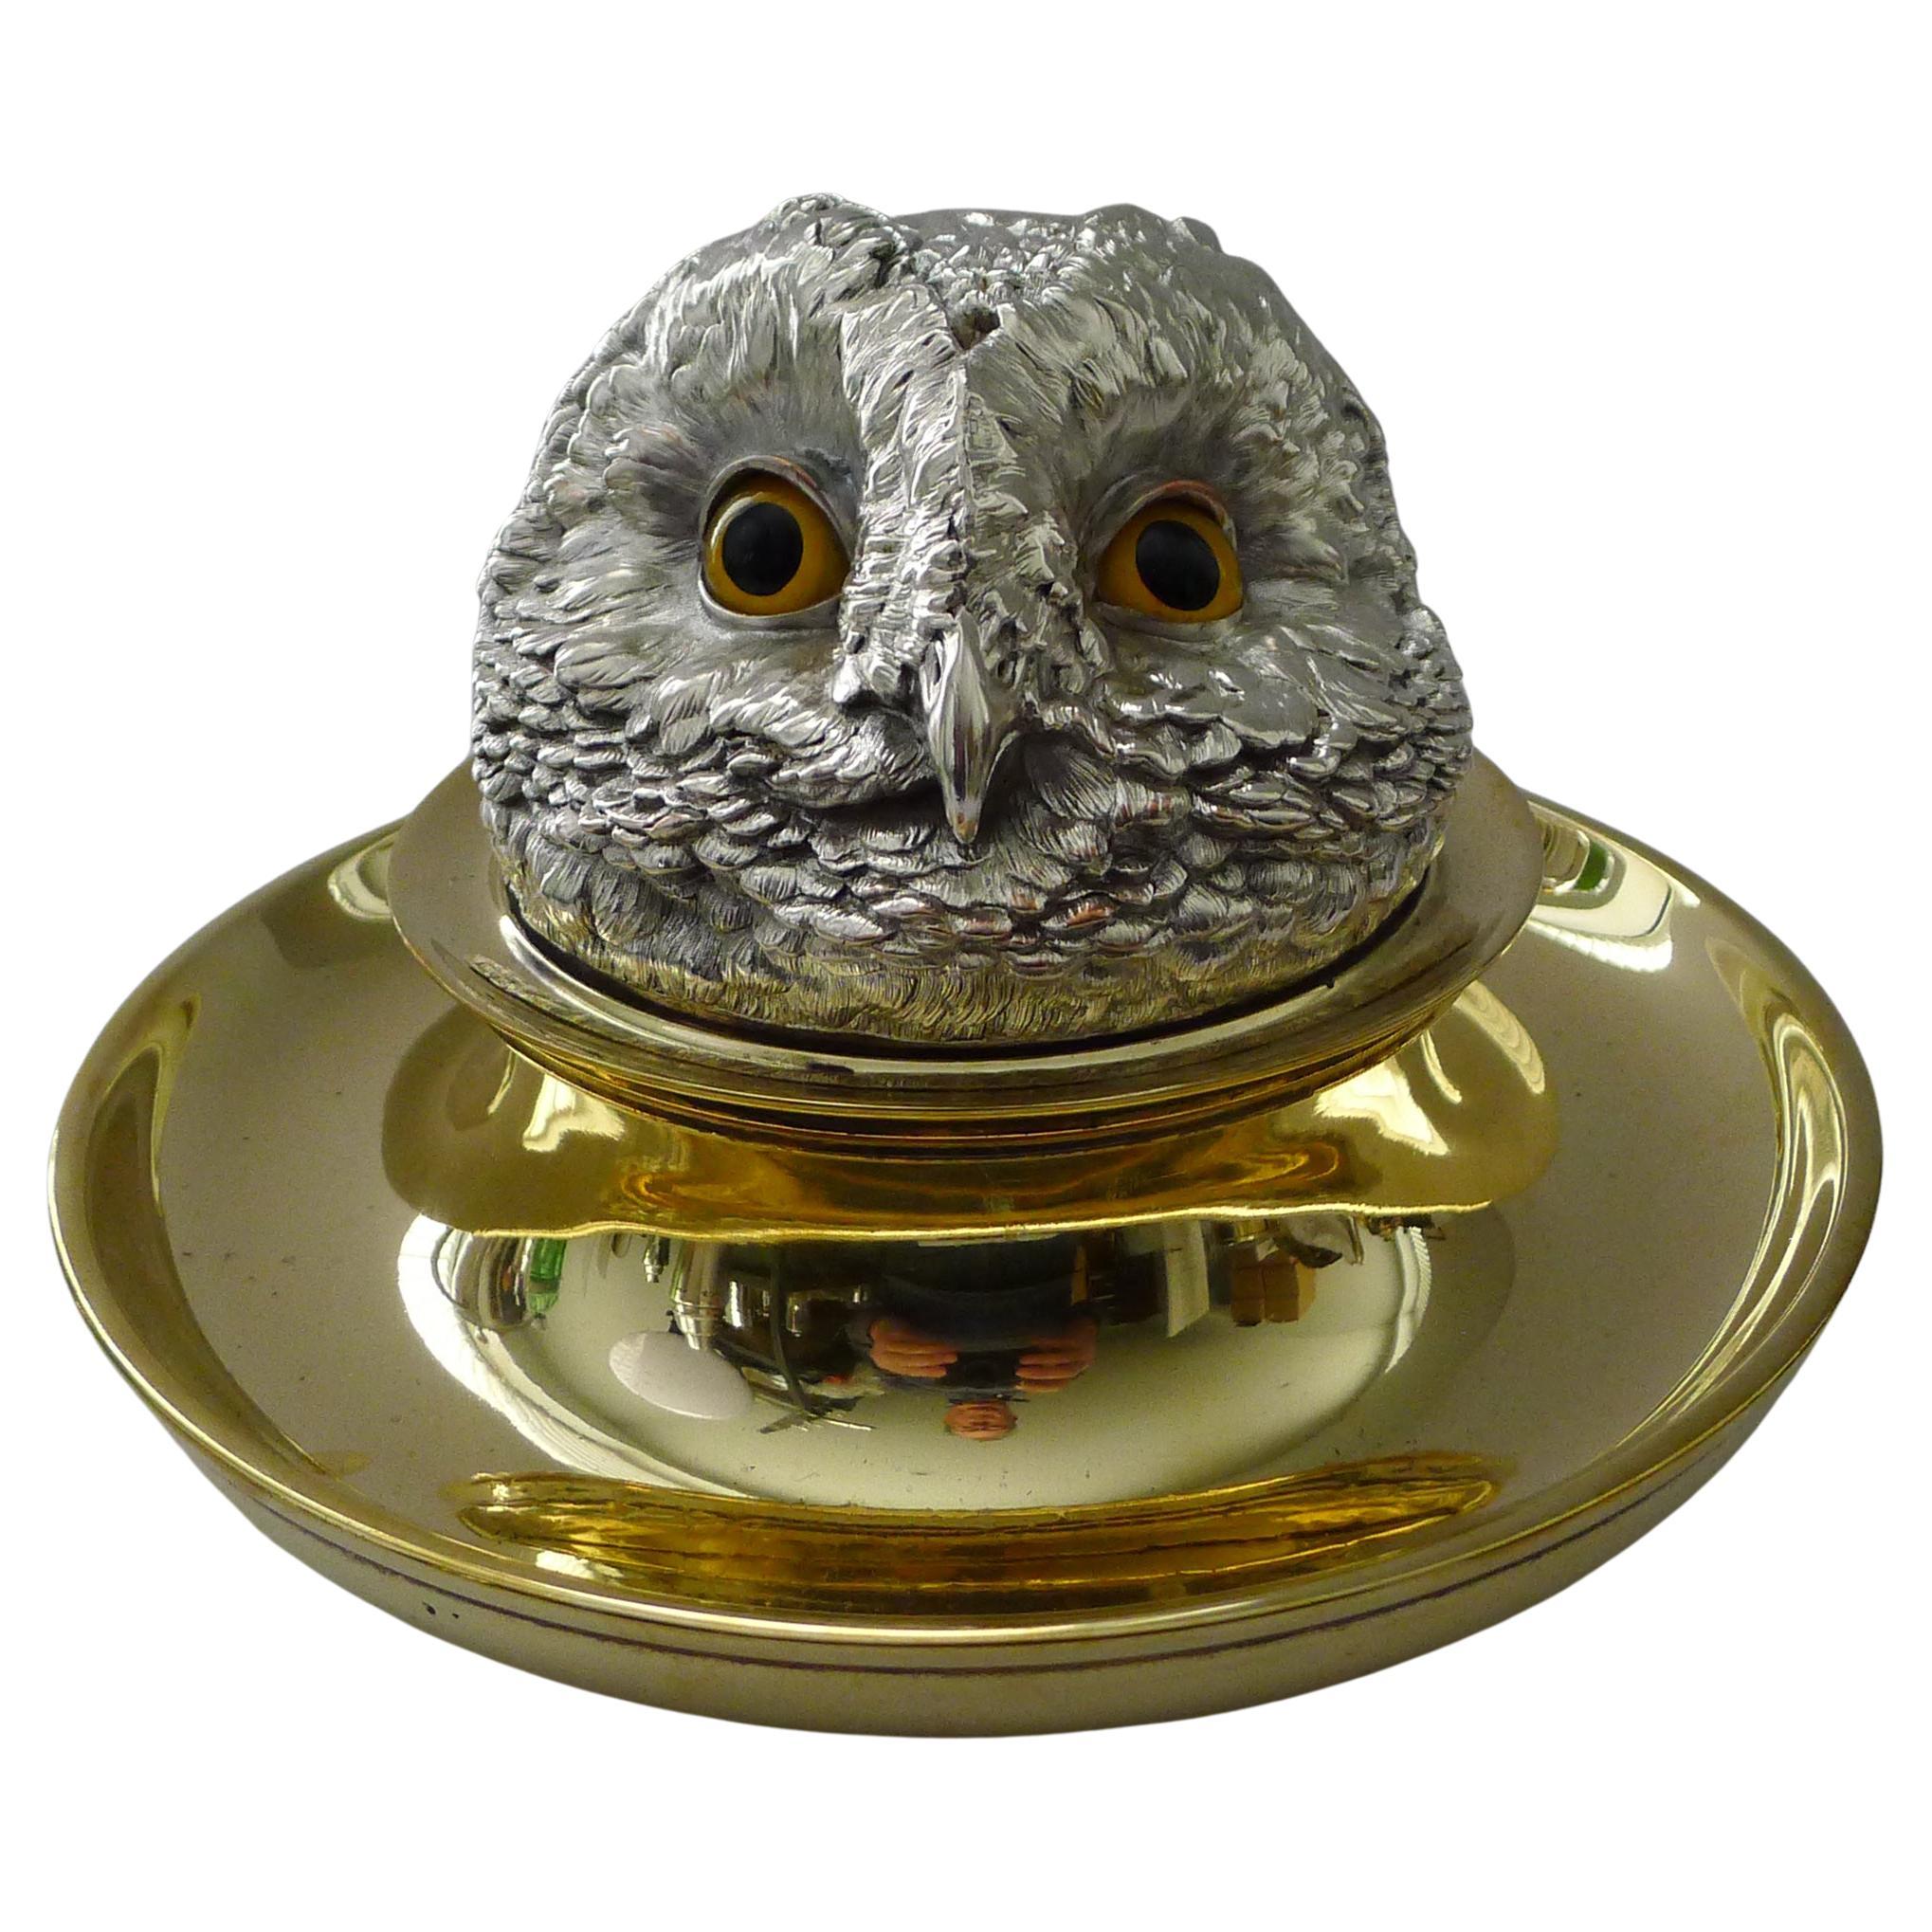 Rare Mammoth English Victorian Novelty Inkwell, Owl with Glass Eyes C.1880 For Sale